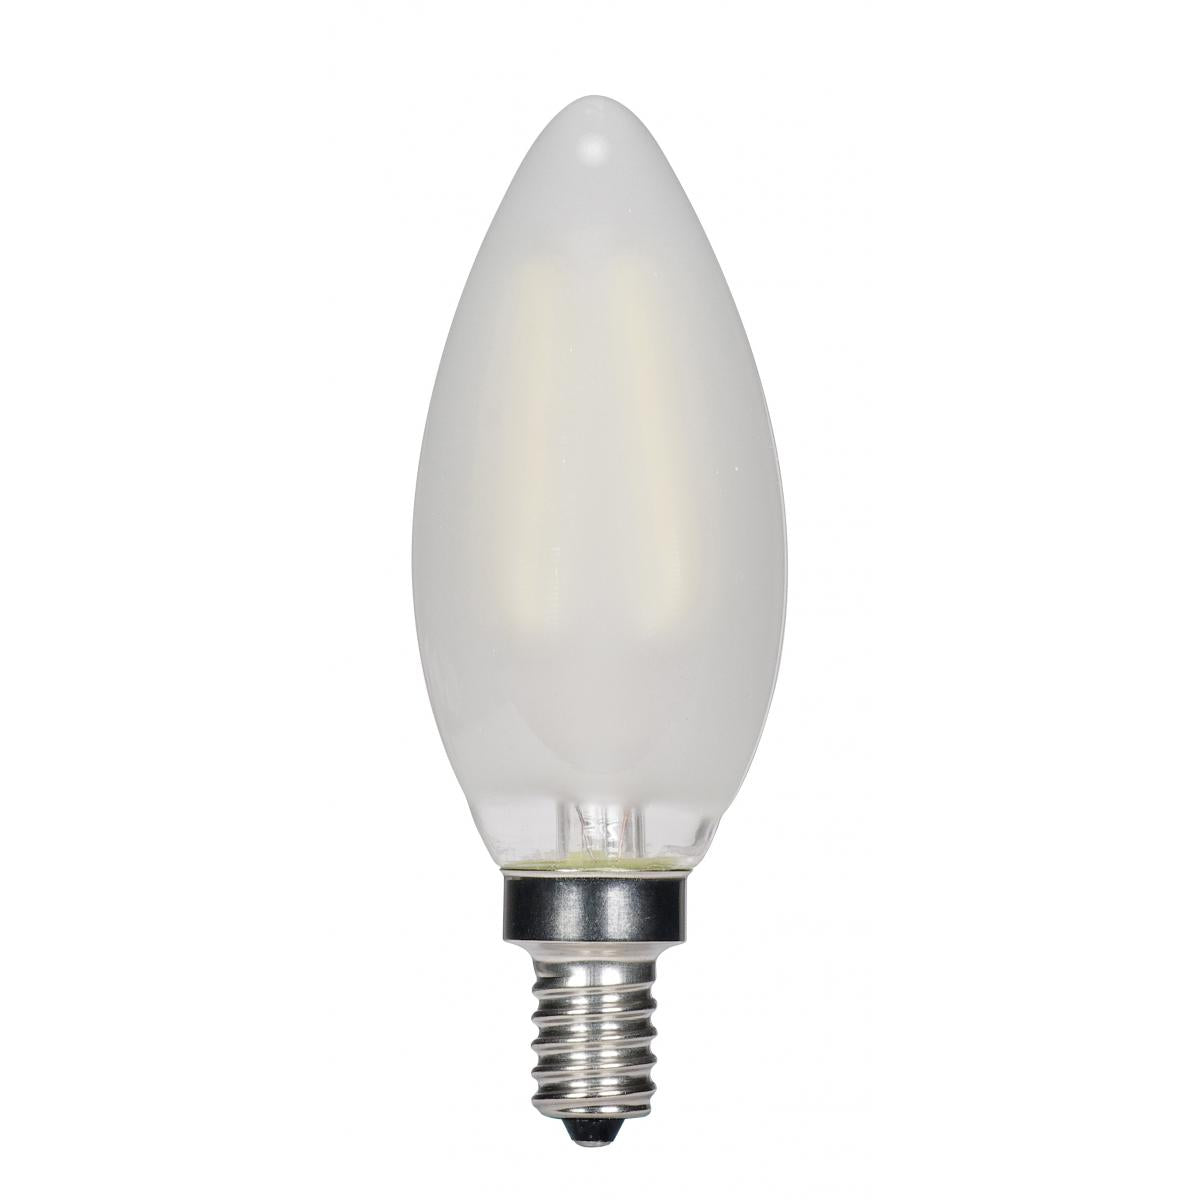 Replacement for Satco S21704 4.5 Watt B11 LED Frosted Candelabra base 2700K 350 Lumens 120 Volt 2-Card - NOW S21823